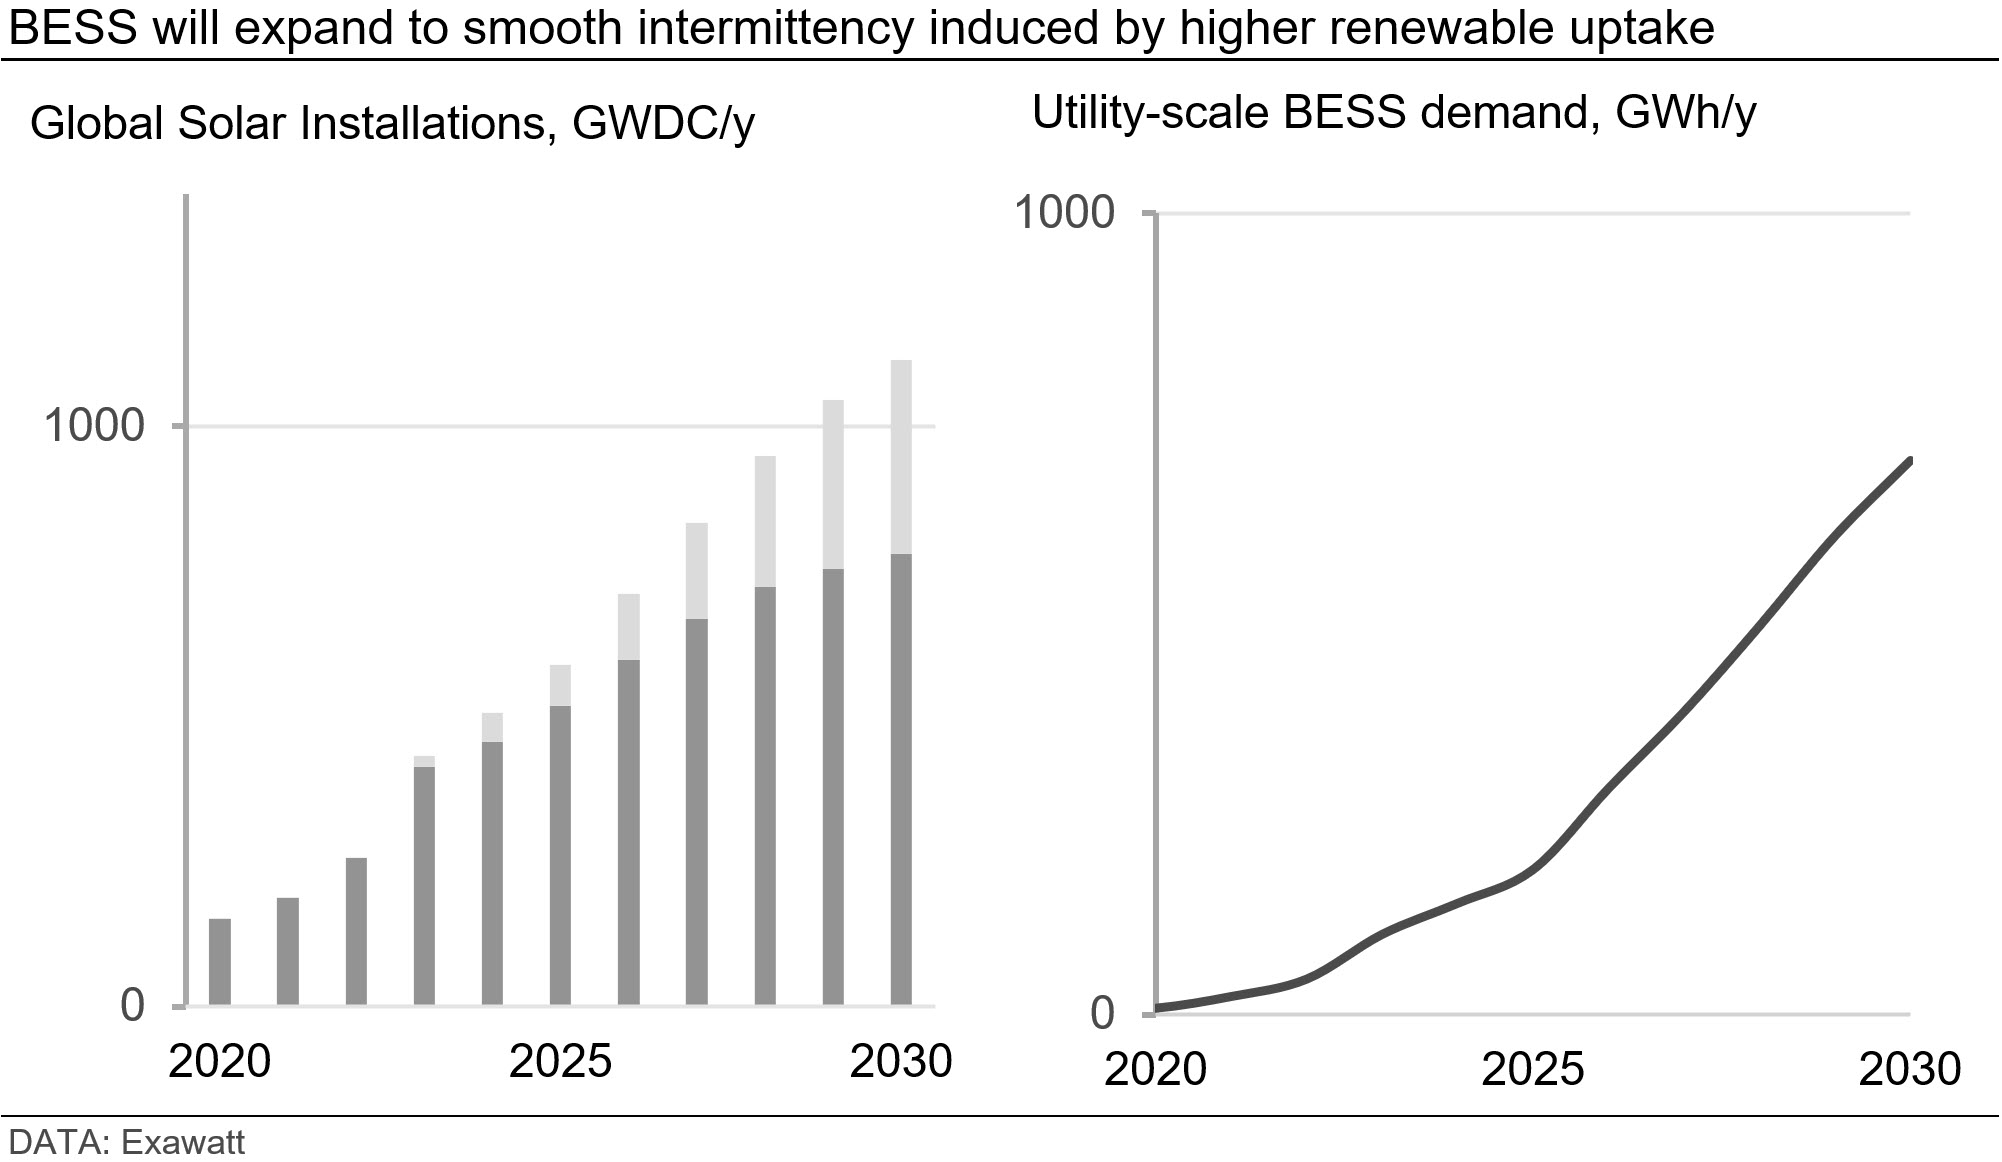 BESS will expand to smooth intermittency induced by higher renewable update